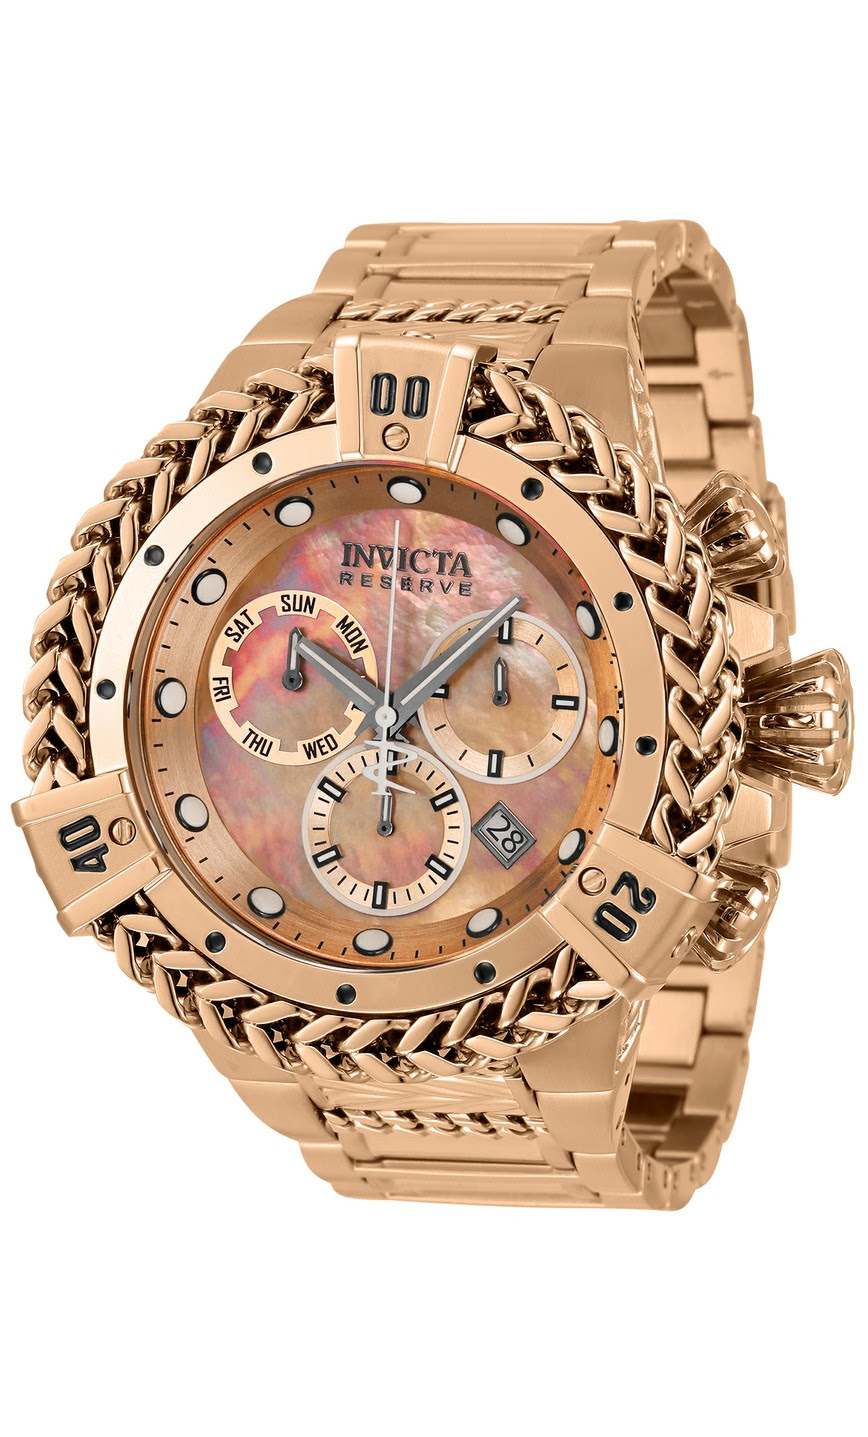 Invicta Reserve Herc Quartz Men's Watch - 53mm Stainless Steel Case, Stainless Steel Band, Rose Gold (34838)